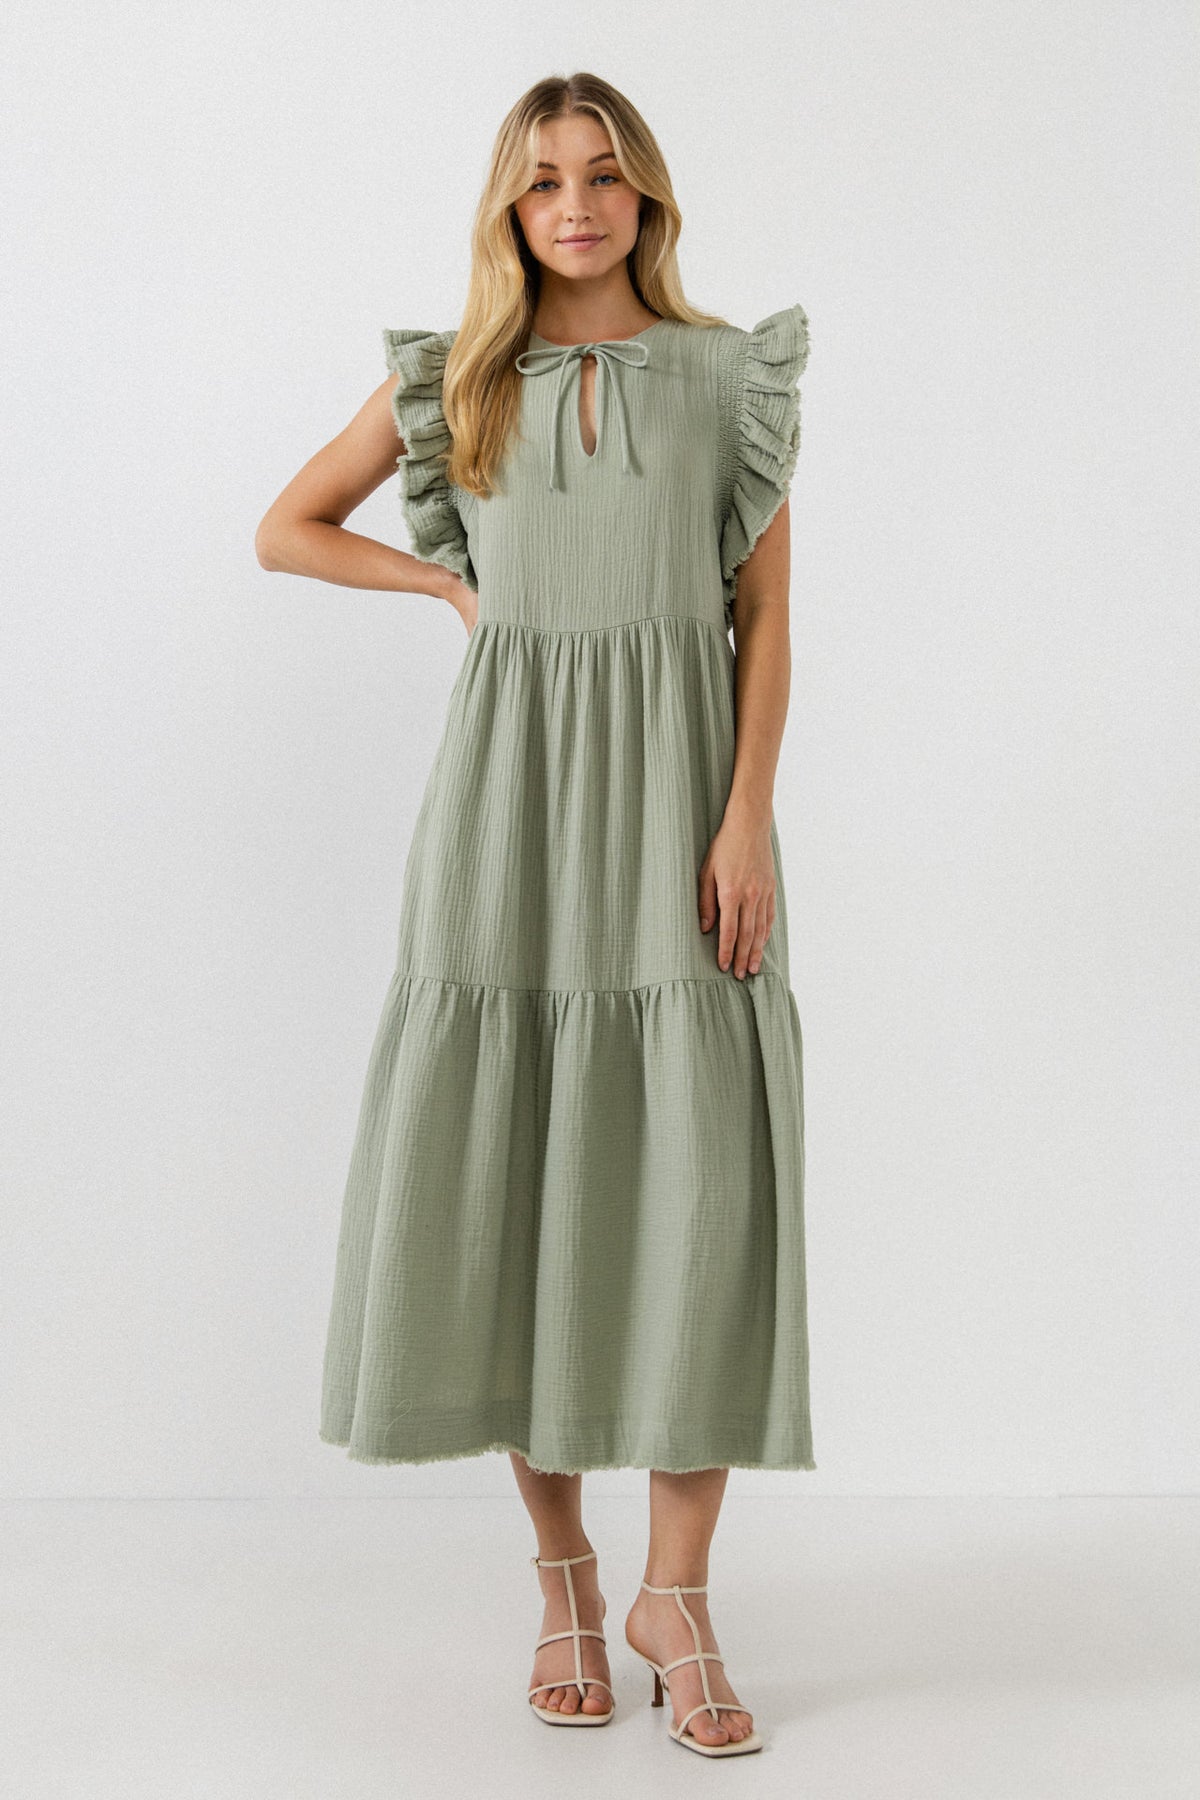 FREE THE ROSES - Ruffled Detail Maxi Dress - DRESSES available at Objectrare